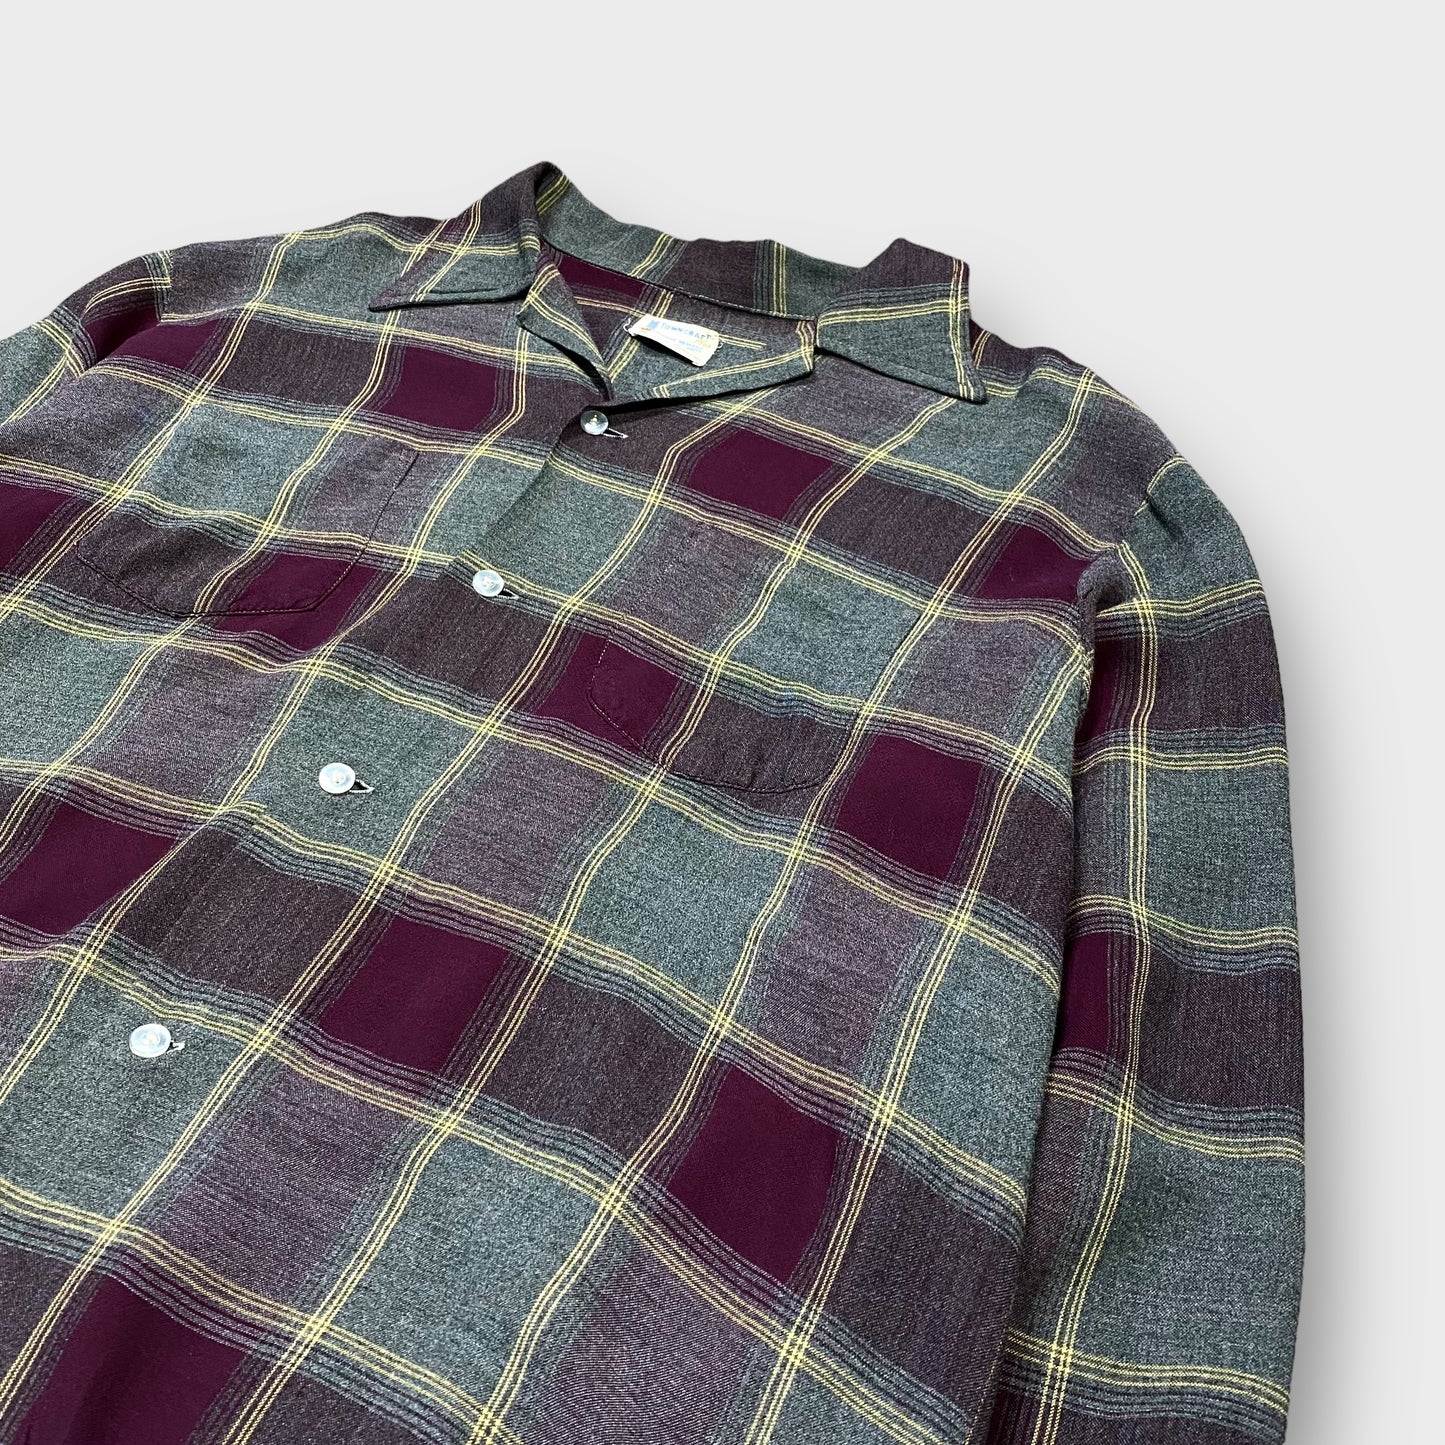 60's "Penneys TOWNCRAFT" Ombre check pattern rayon shirt